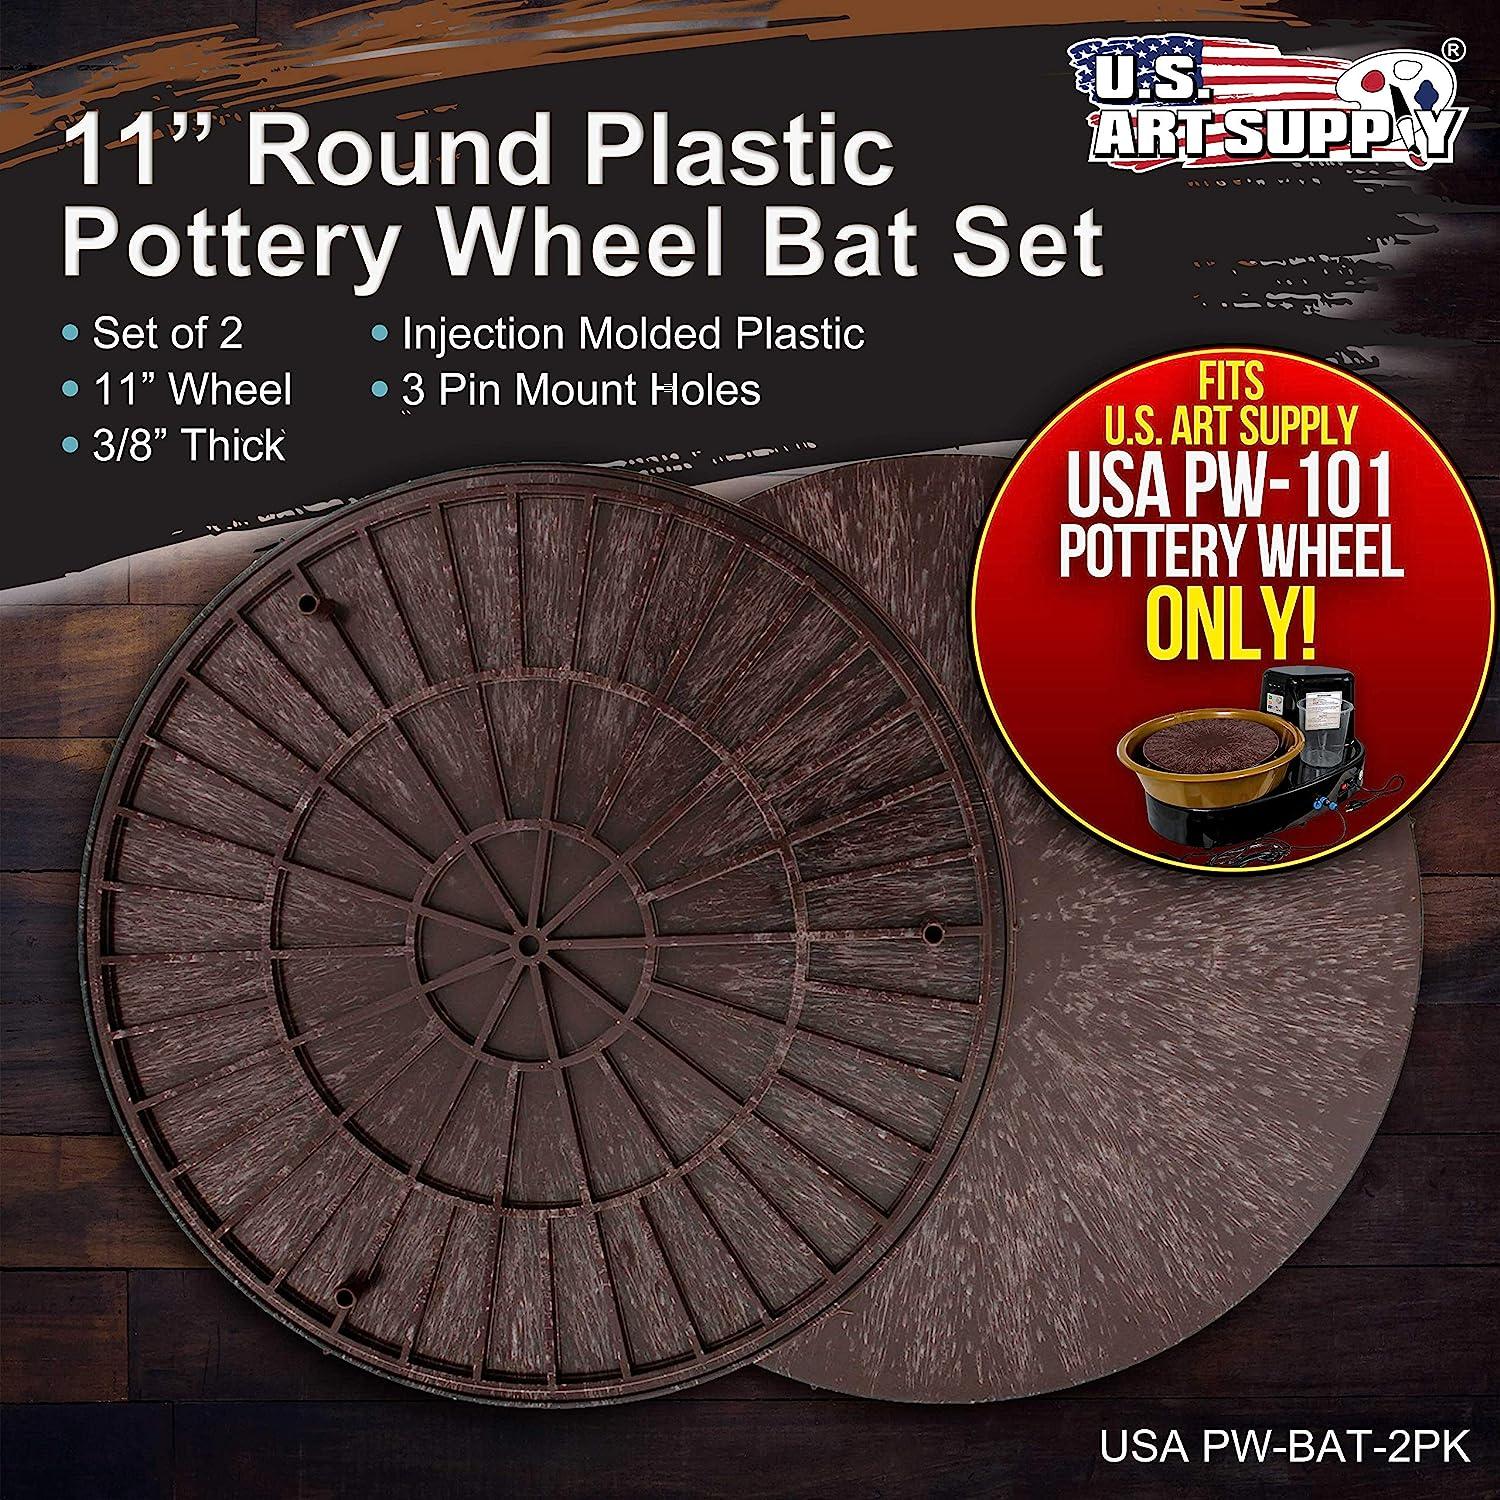 U.S. Art Supply - 11 Round Plastic Pottery Wheel Bats, Set of 2 - Durable,  Balanced Bat for Use Spinning Clay & Making Ceramics - Design to Only Fit  U.S. Art Supply